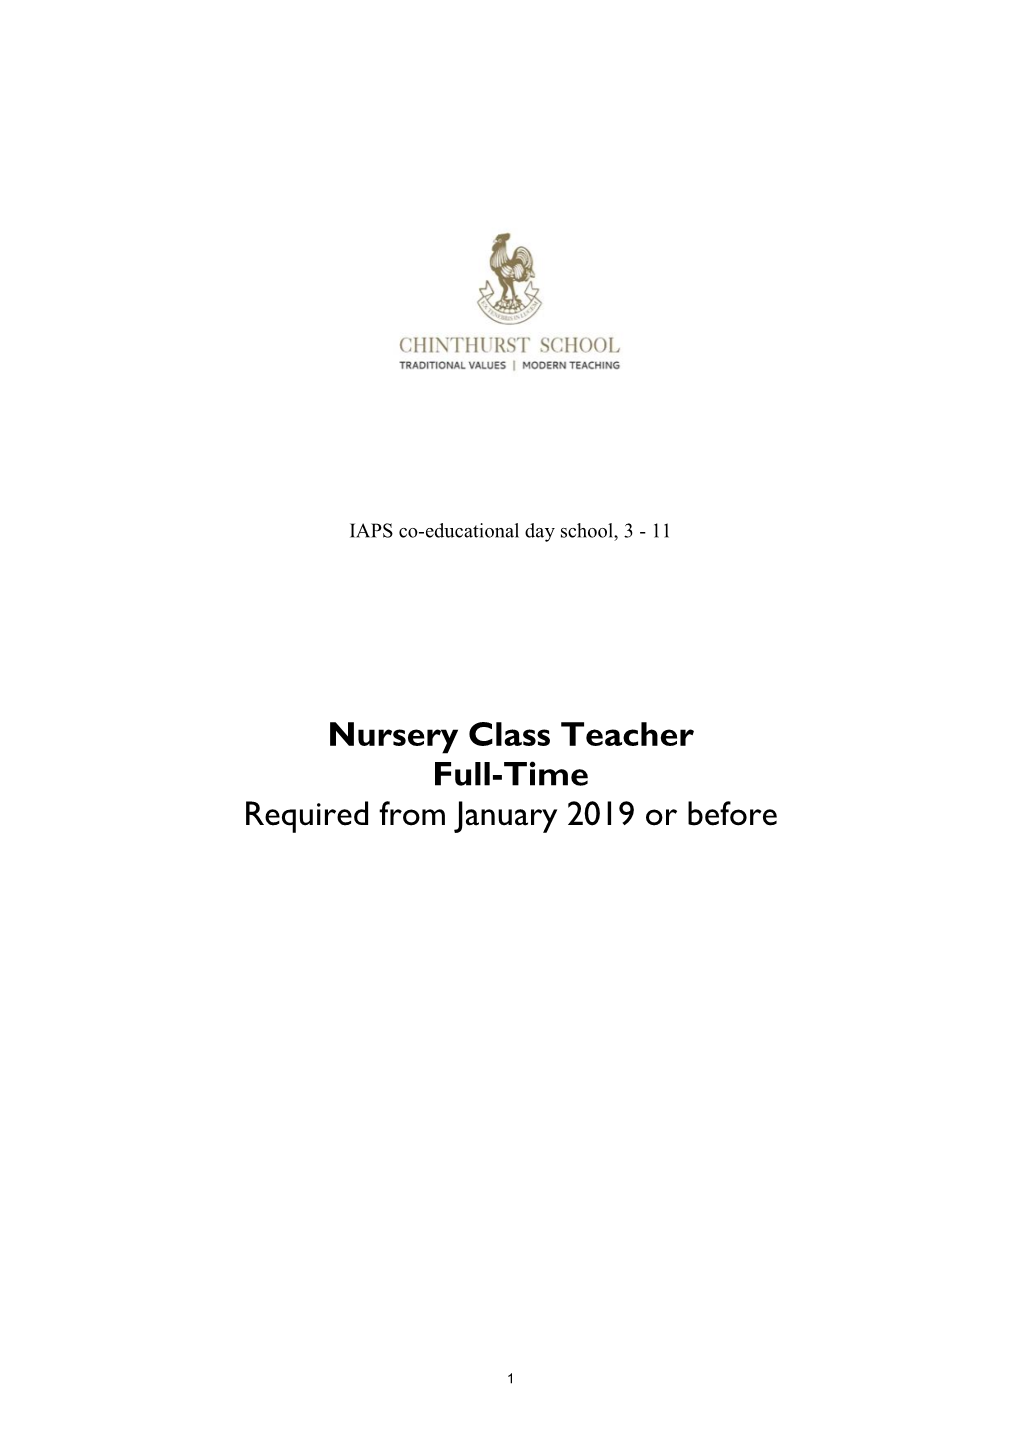 Nursery Class Teacher Full-Time Required from January 2019 Or Before